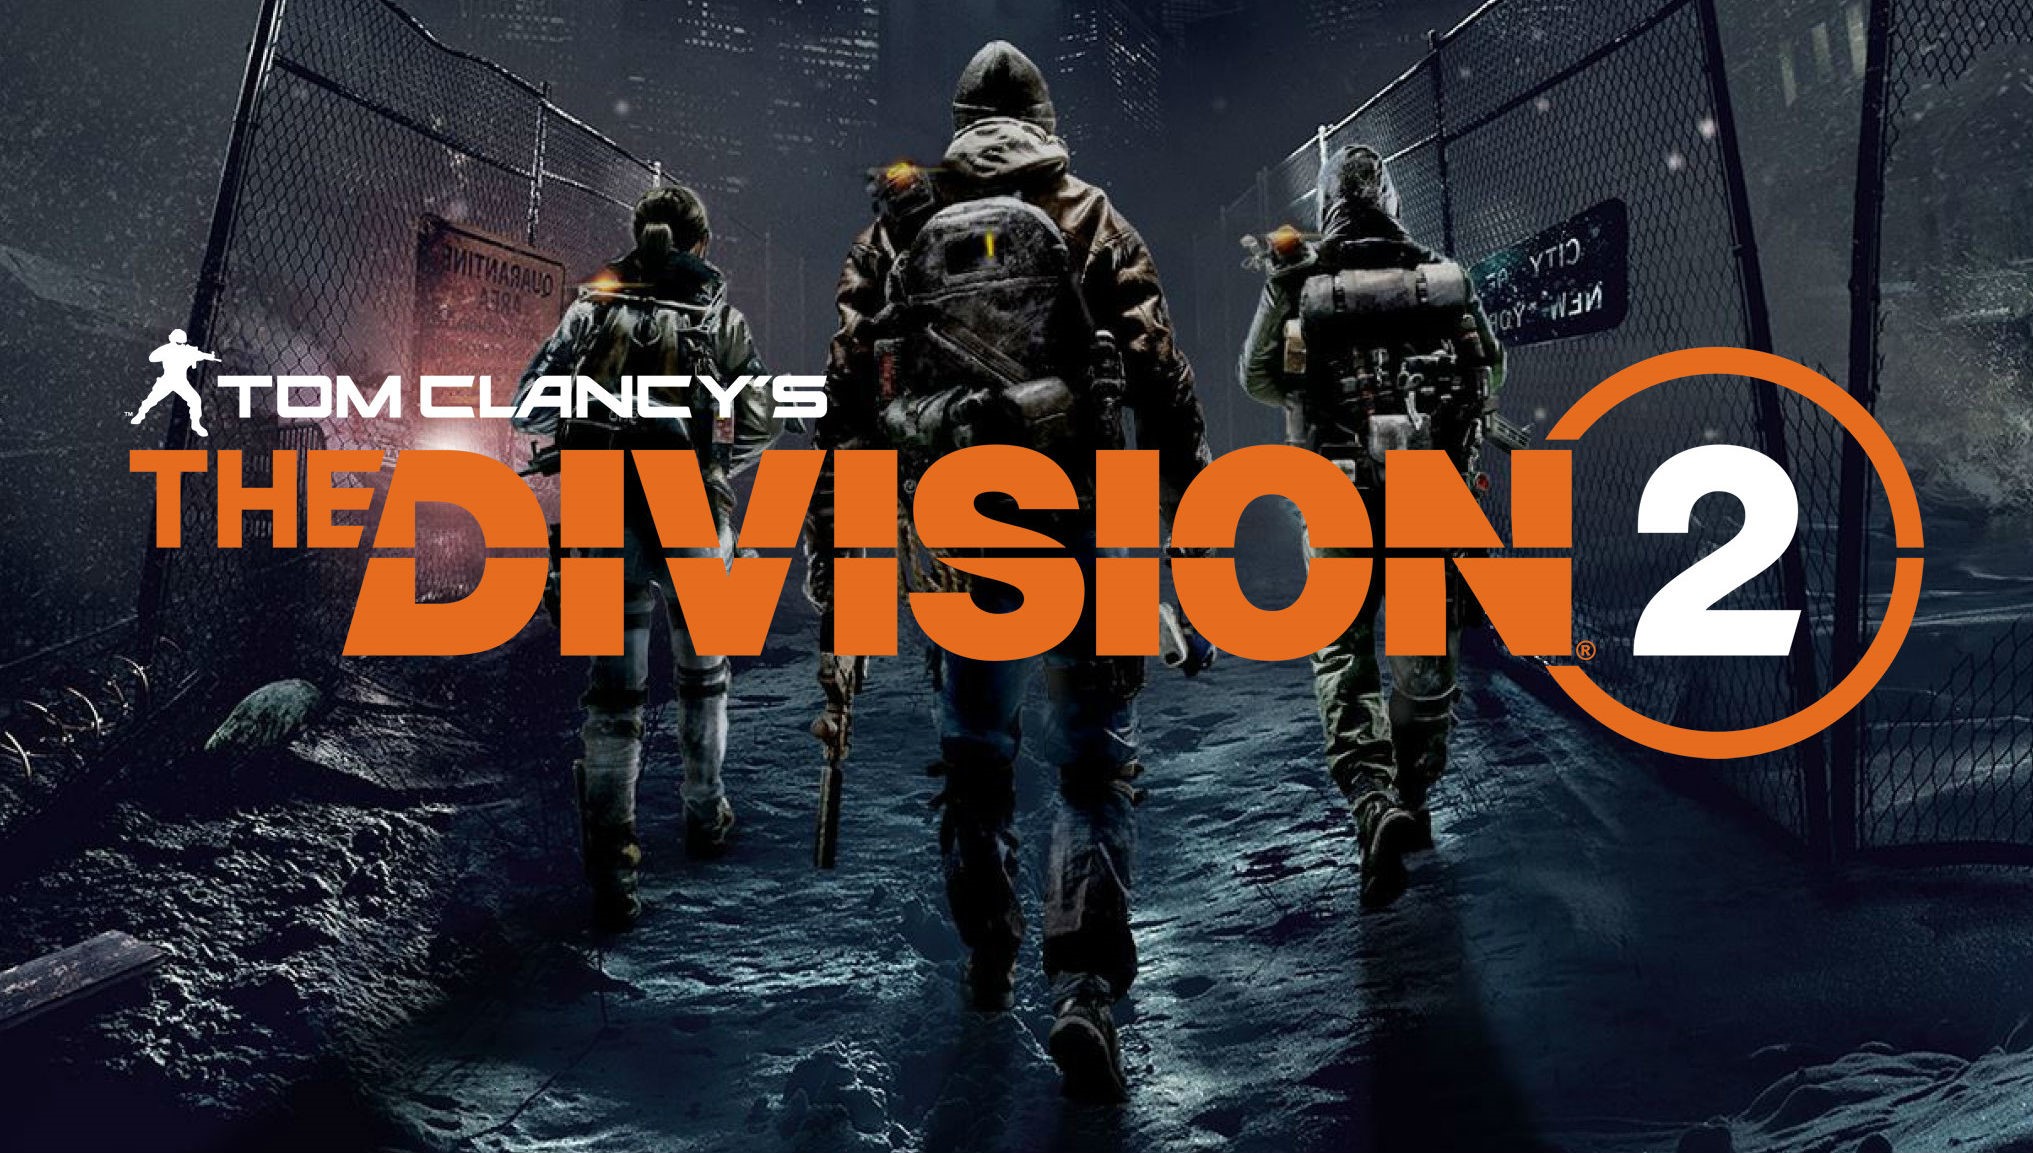 Tom clancy s ultimate edition. Tom Clancy’s the Division 2. Tom Clancy s the Division. Tom Clancy's the Division 2 стрим. Tom Clancy’s the Division 2 обложка.